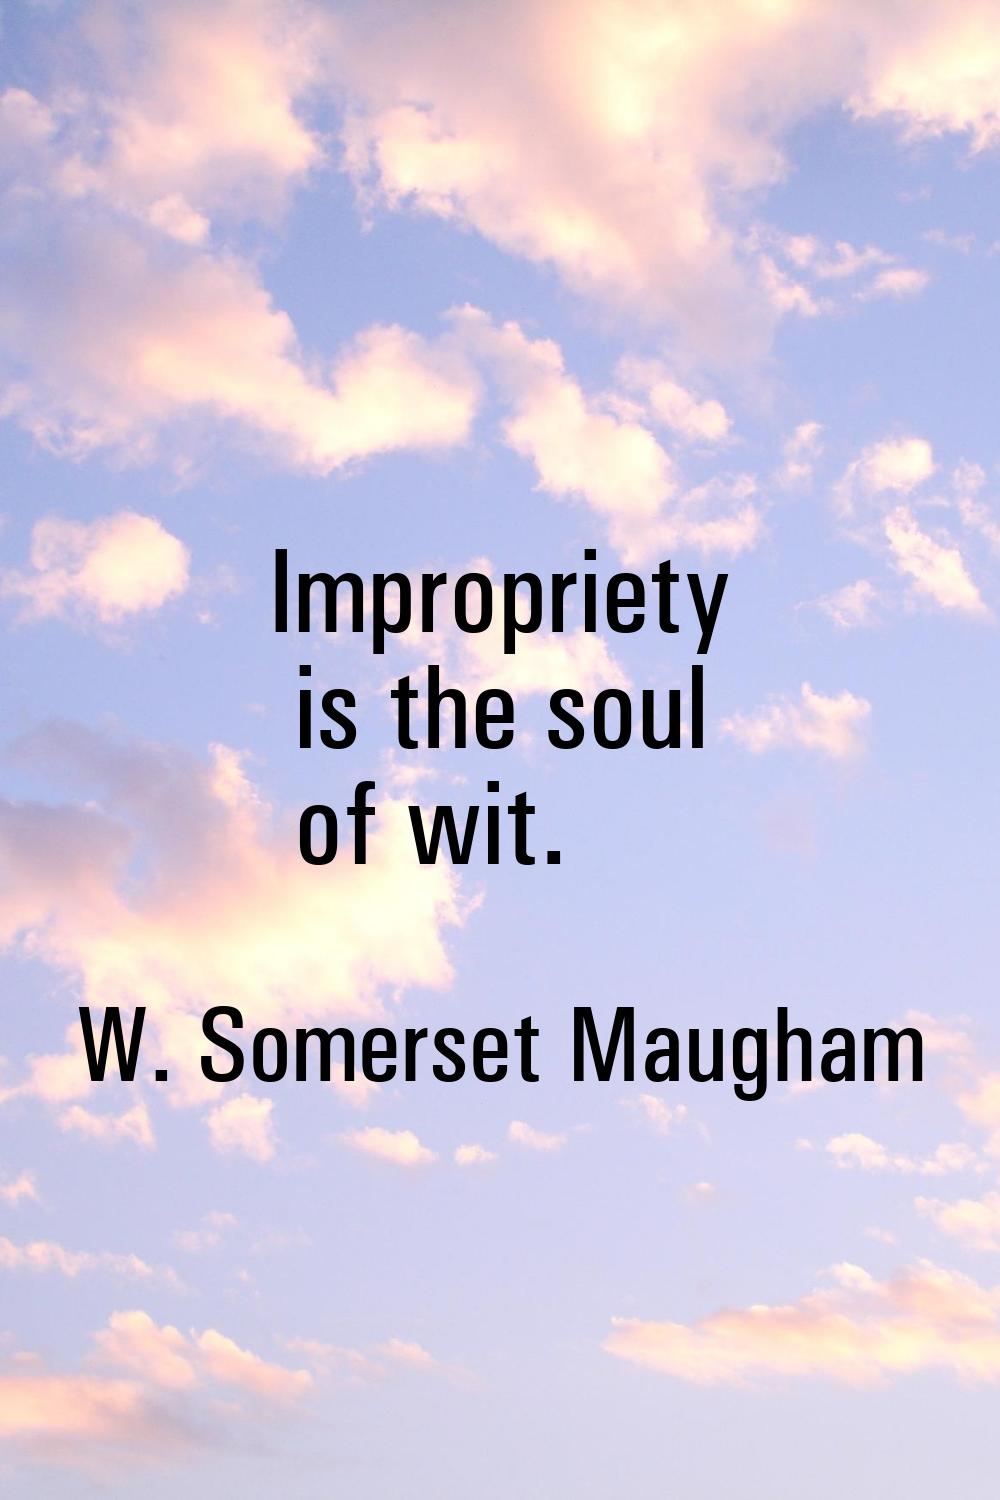 Impropriety is the soul of wit.